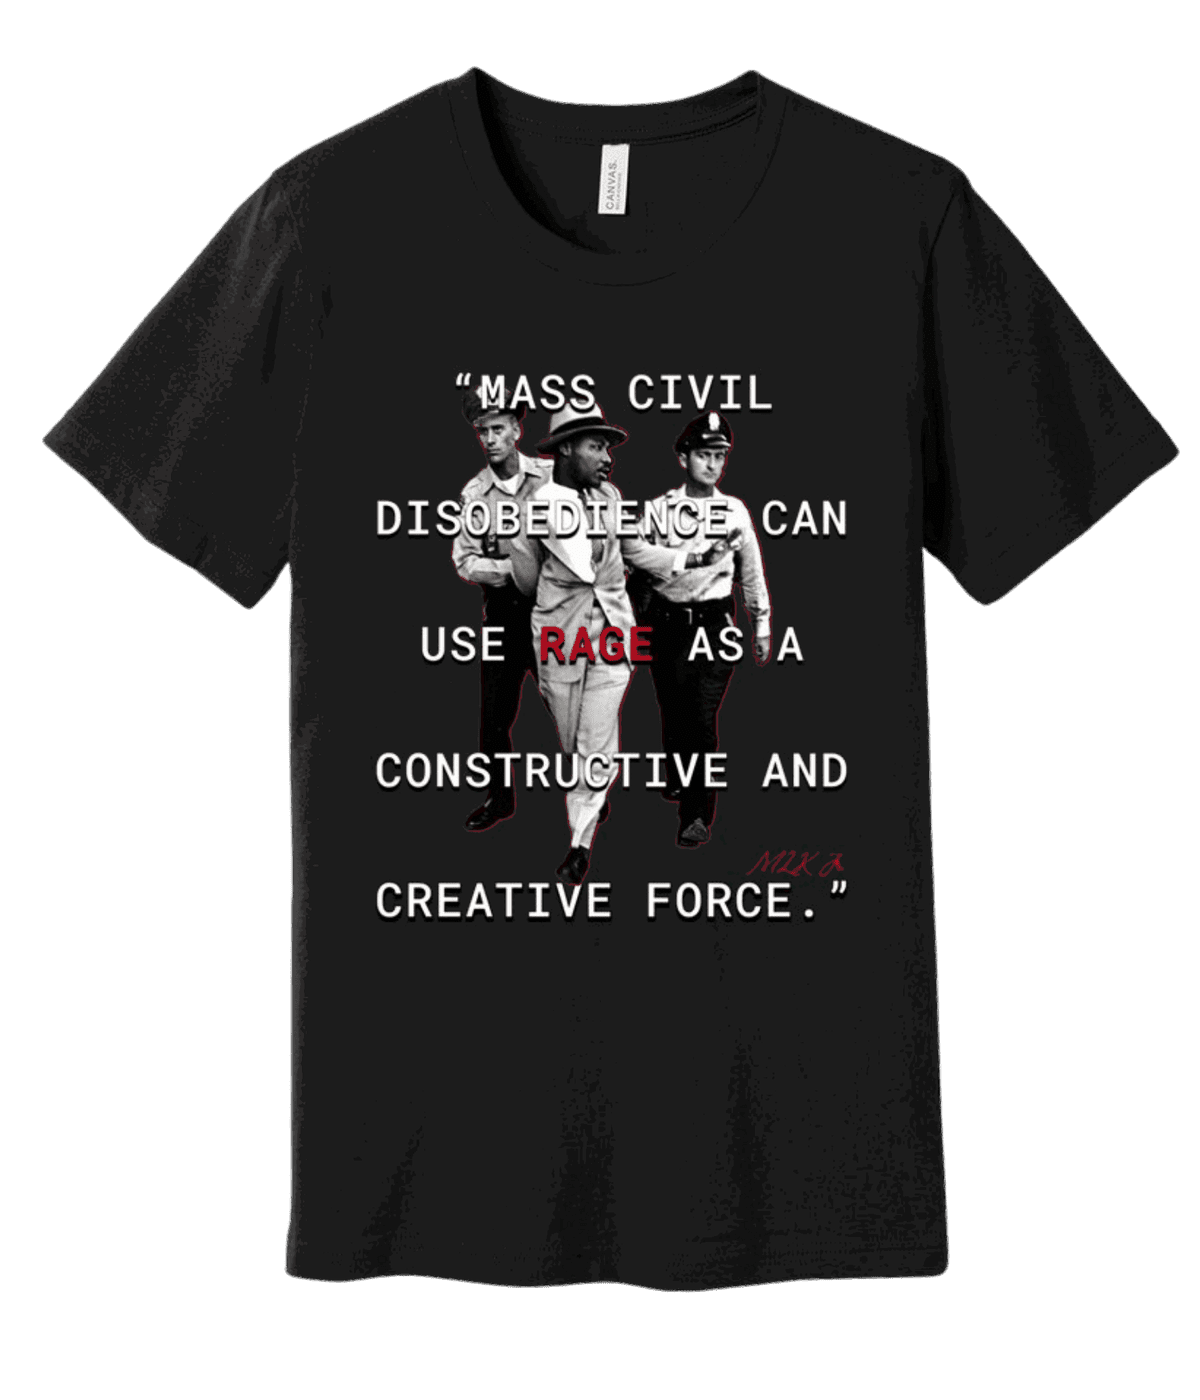 Martin Luther King Jr. (MLK) Civil Rights Tee front facing